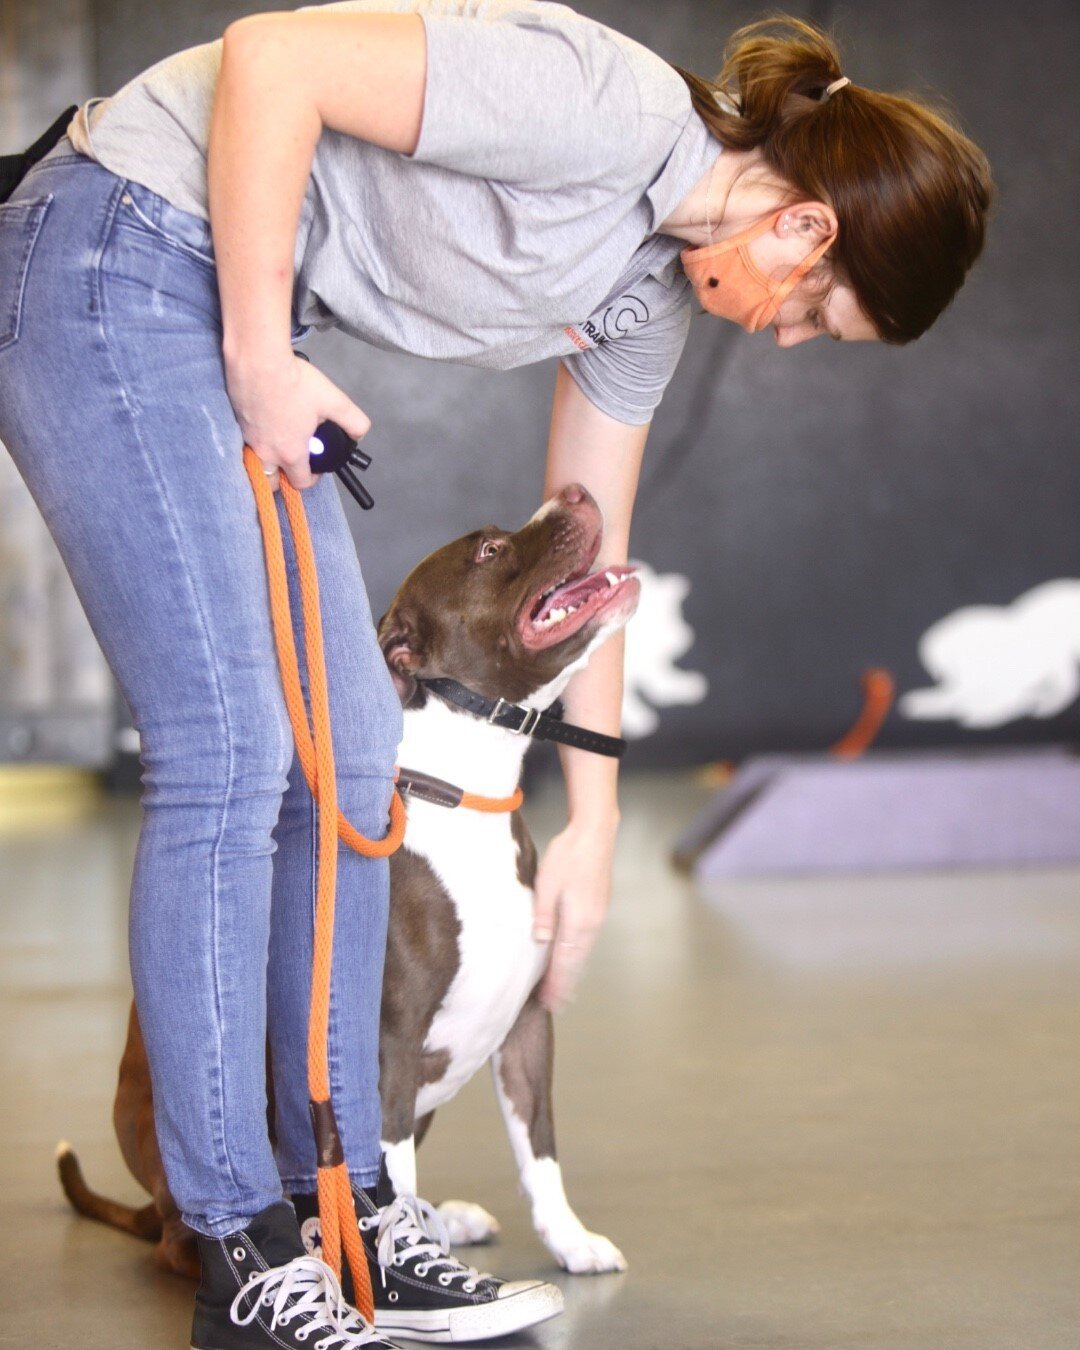 Did you know rescue dogs can benefit from obedience training? Once they&rsquo;ve gained comfortability and trust in you, give them the gift of structure and confidence through training! Whether it&rsquo;s basic commands, behavior modification, or soc